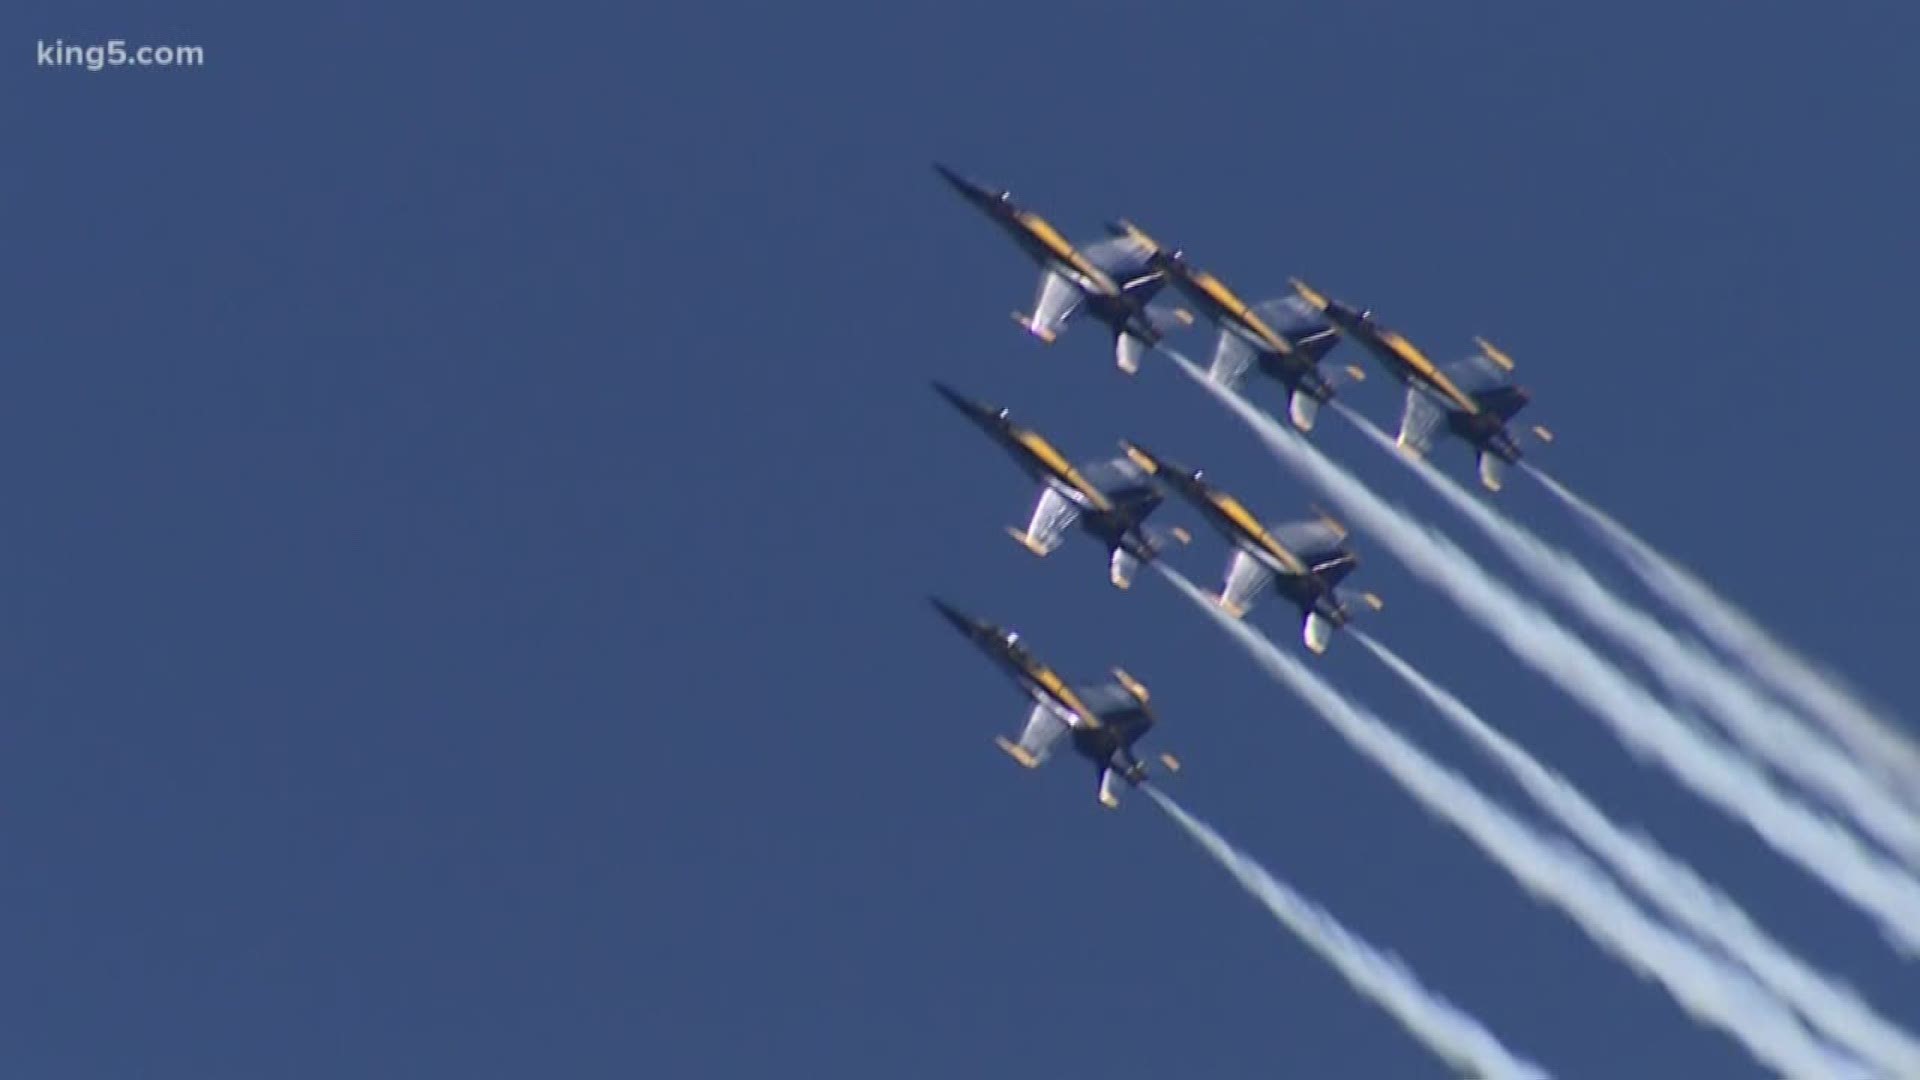 Attendees were excited about the bridge being open to get to Seafair. However, Washington State Patrol troopers are asking drivers to not stop on the highway or interstate to watch the airshow.